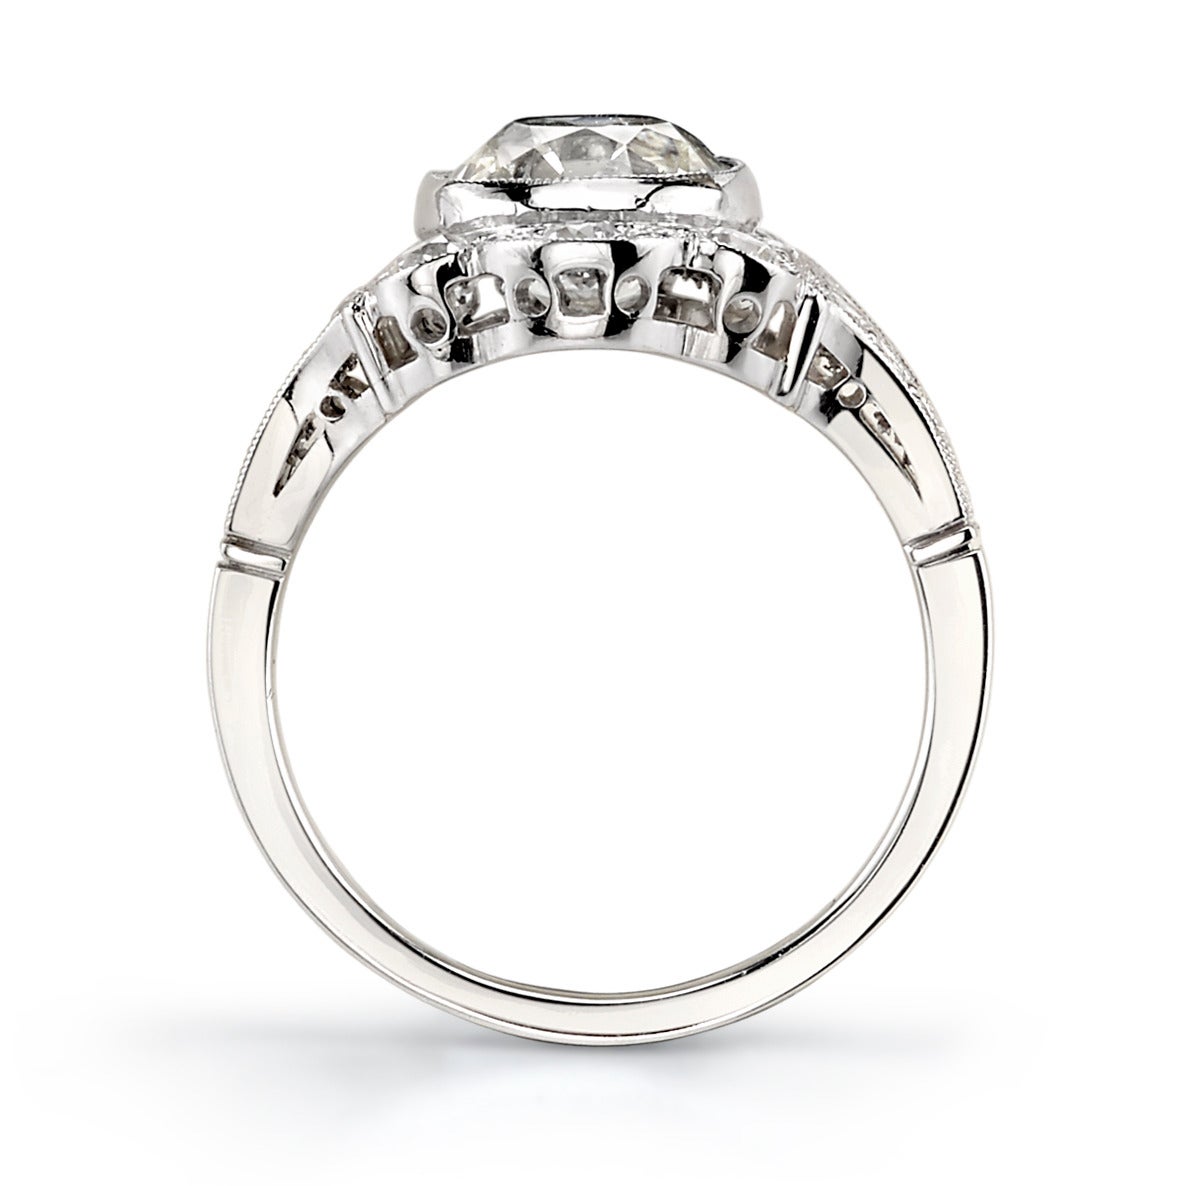 2.40ct M/SI1 EGL certified vintage Cushion diamond set in a handcrafted platinum mounting. An Edwardian inspired design that features a low profile, scalloped edges, and a beautiful detailed band.